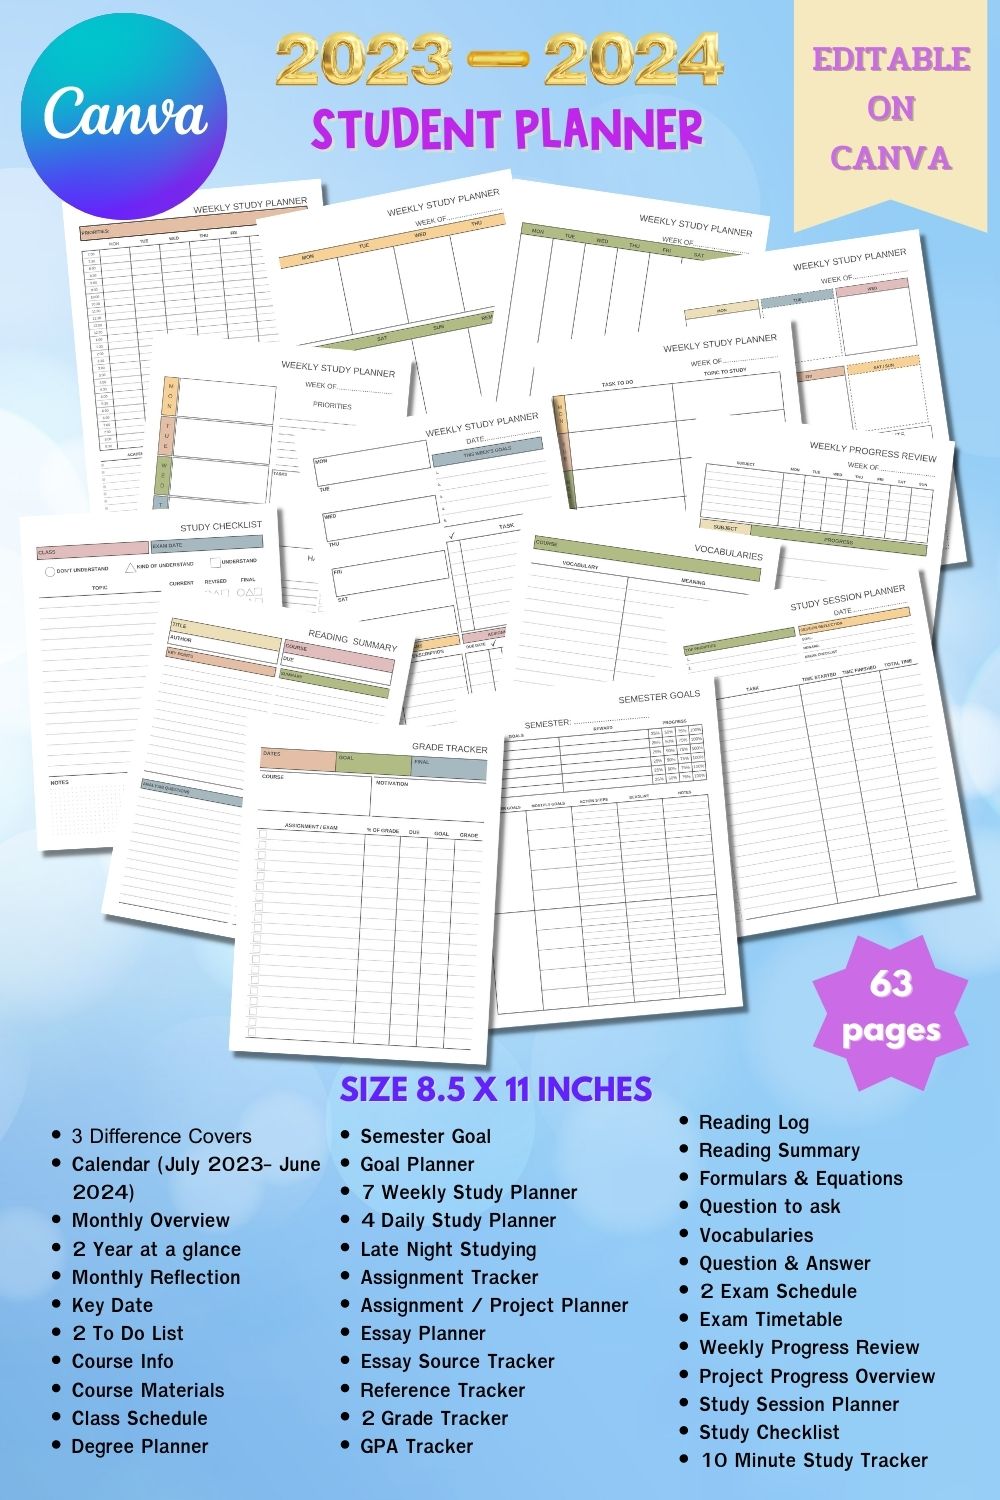 2023-2024 Student Planner - Canva Template pinterest preview image.